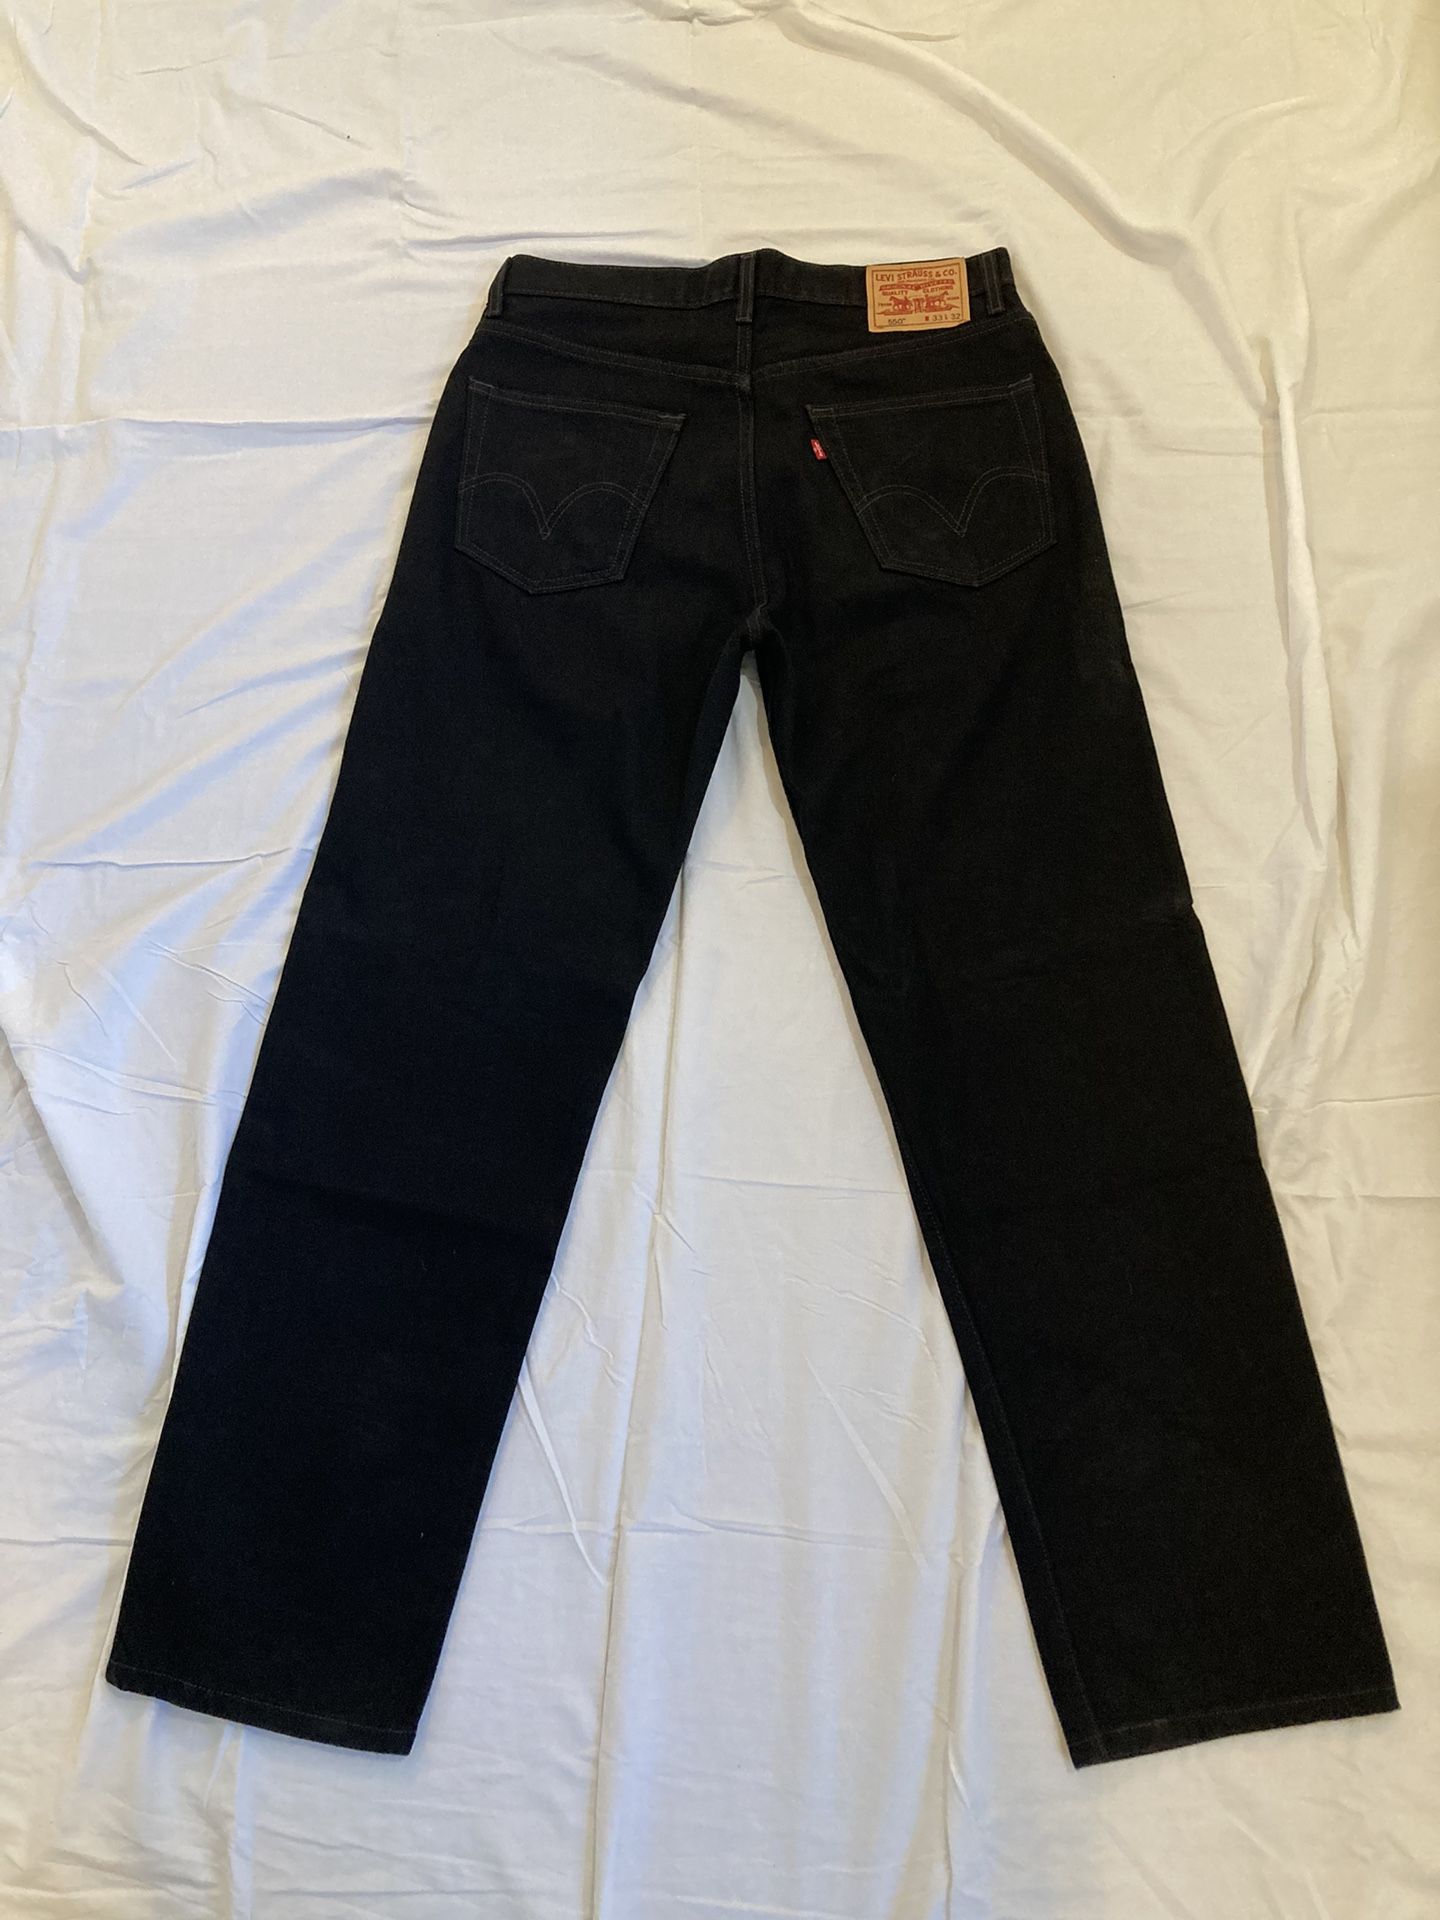 Relaxed Fit Levi’s Black